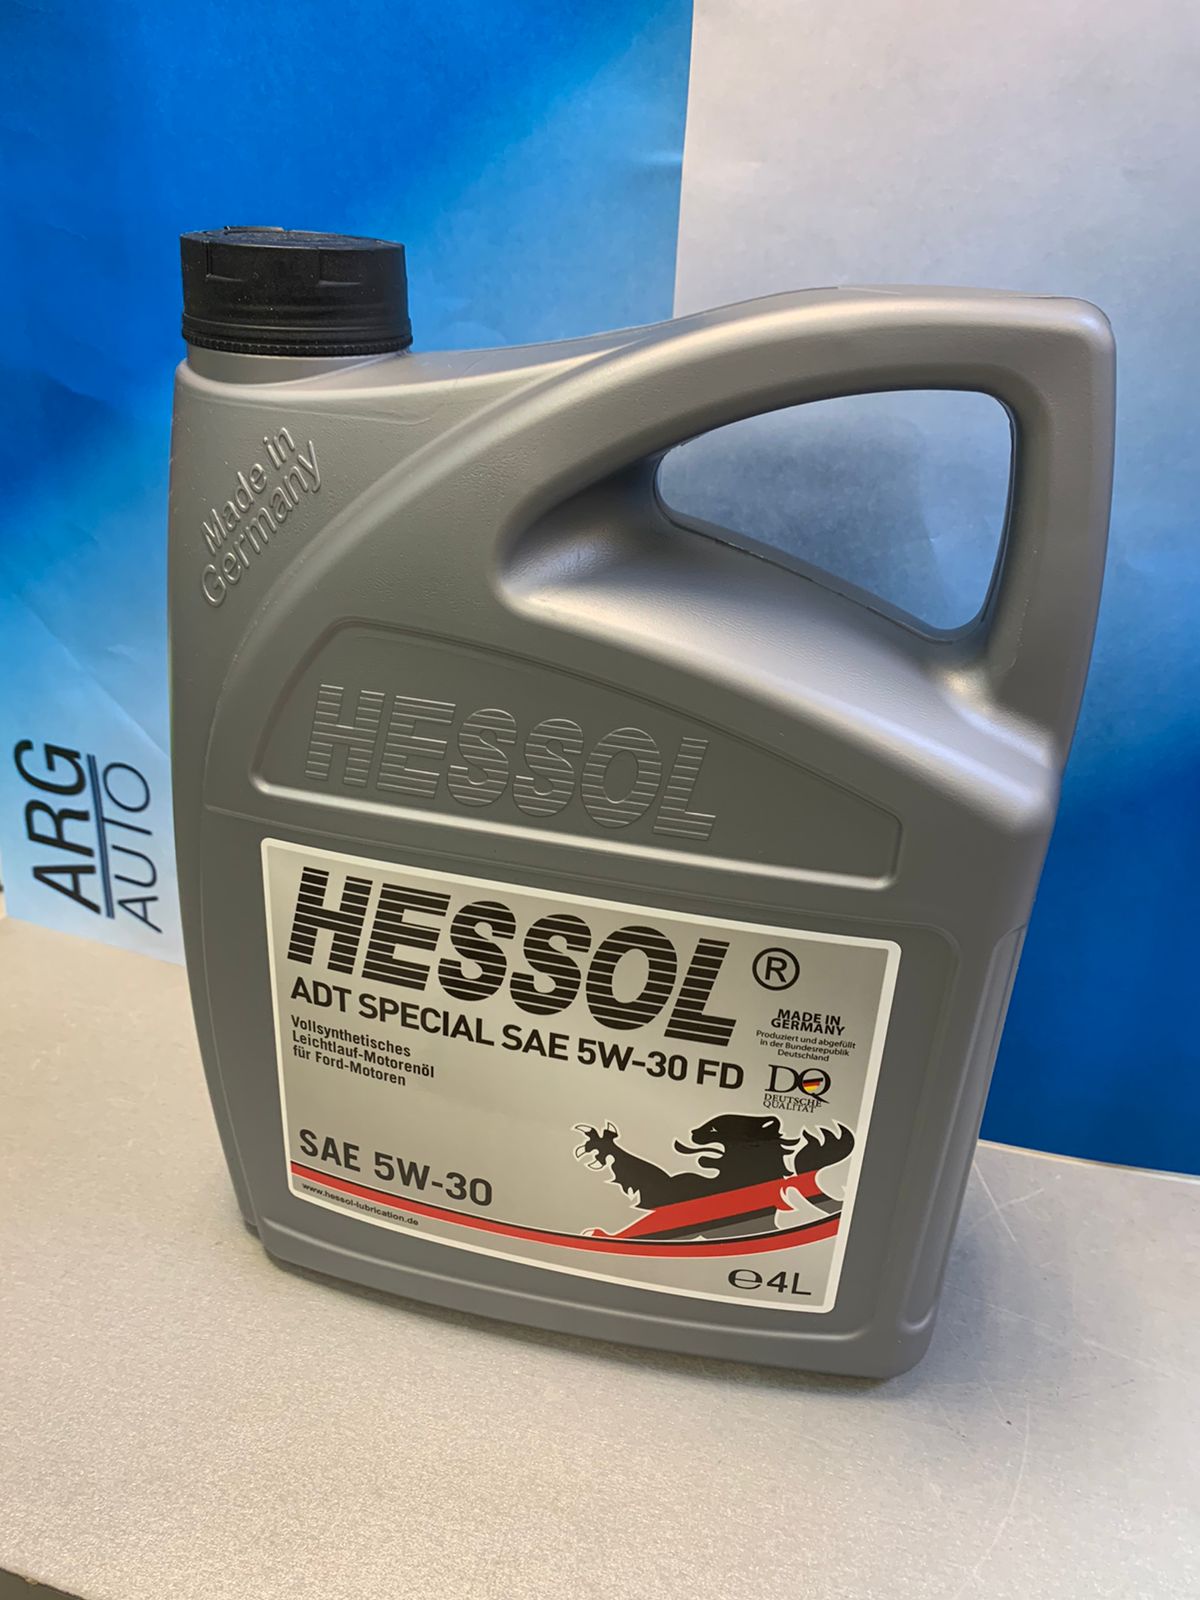 Hessol ADT-SPECIAL 5W-30 4L